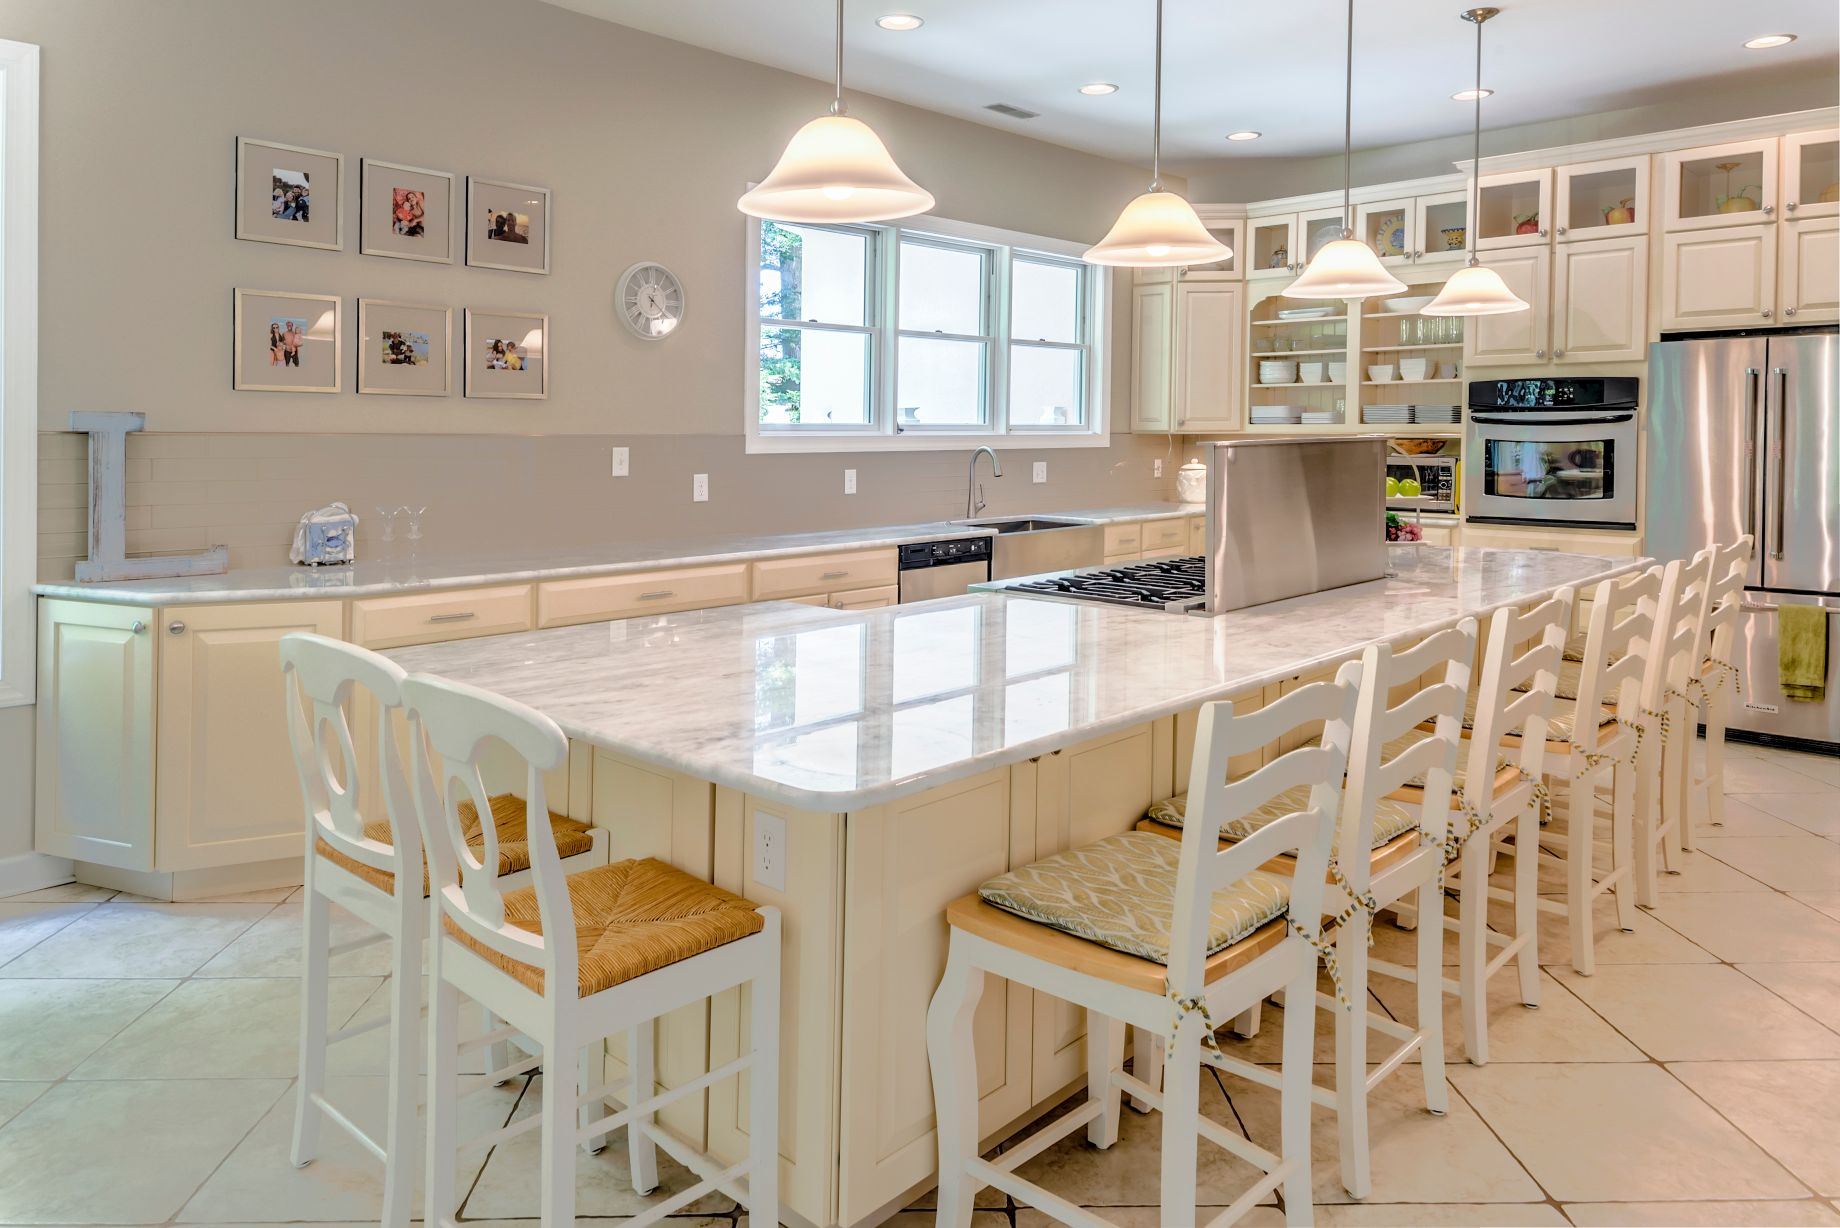 Kitchen in Juniper Court, Ocean Pines MD with Four Pendant Lights and White Chairs